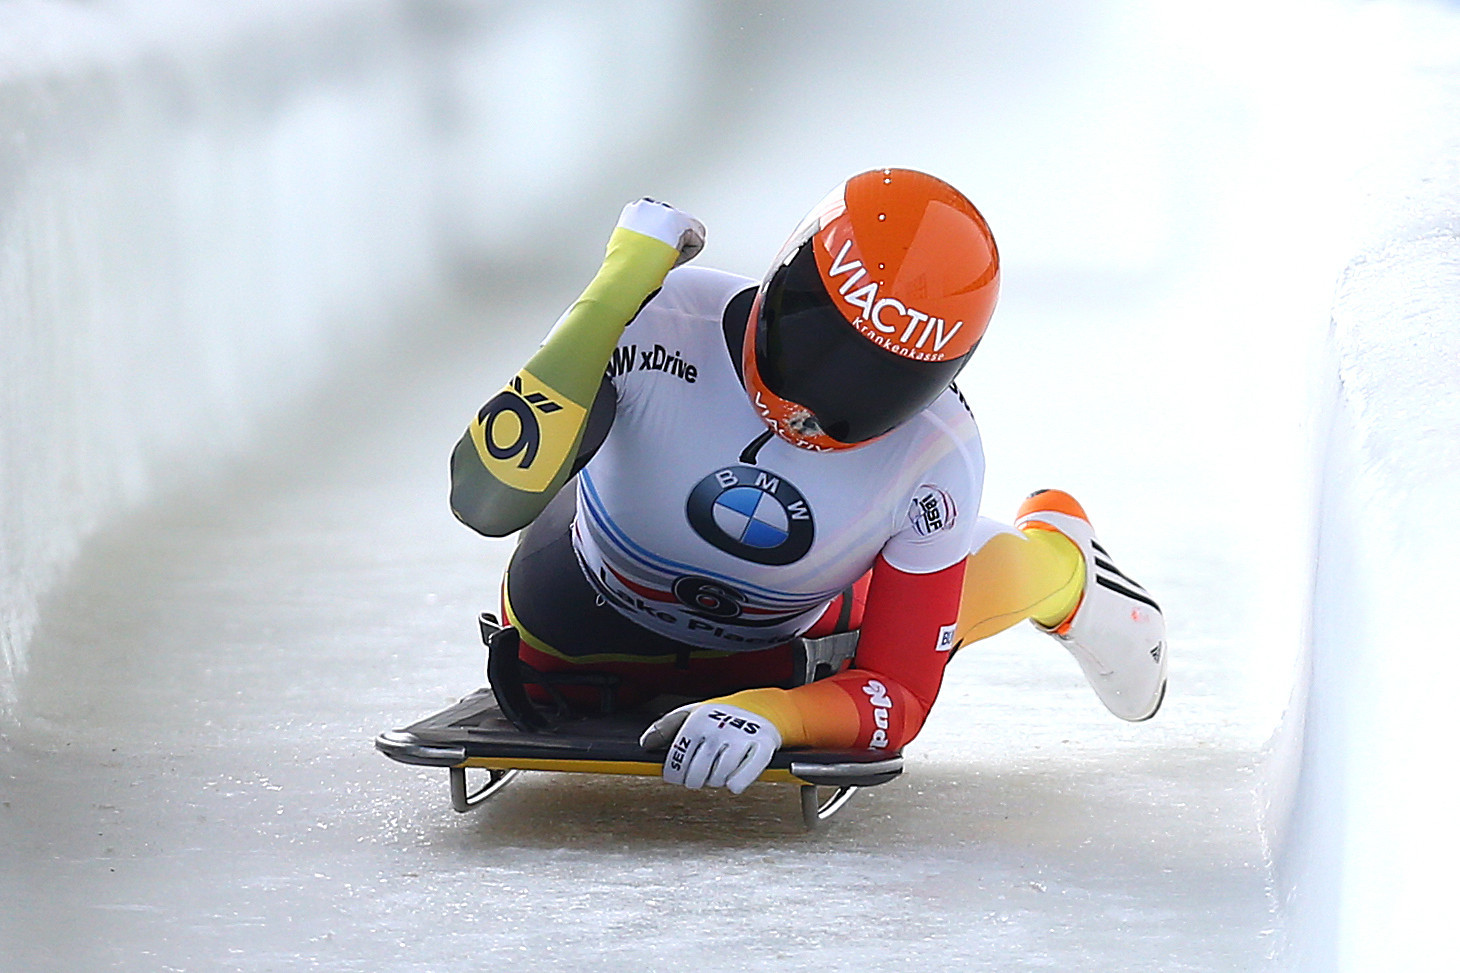 Germany have been dominant in skeleton over the past few years under Dirk Matschenz ©Getty Images